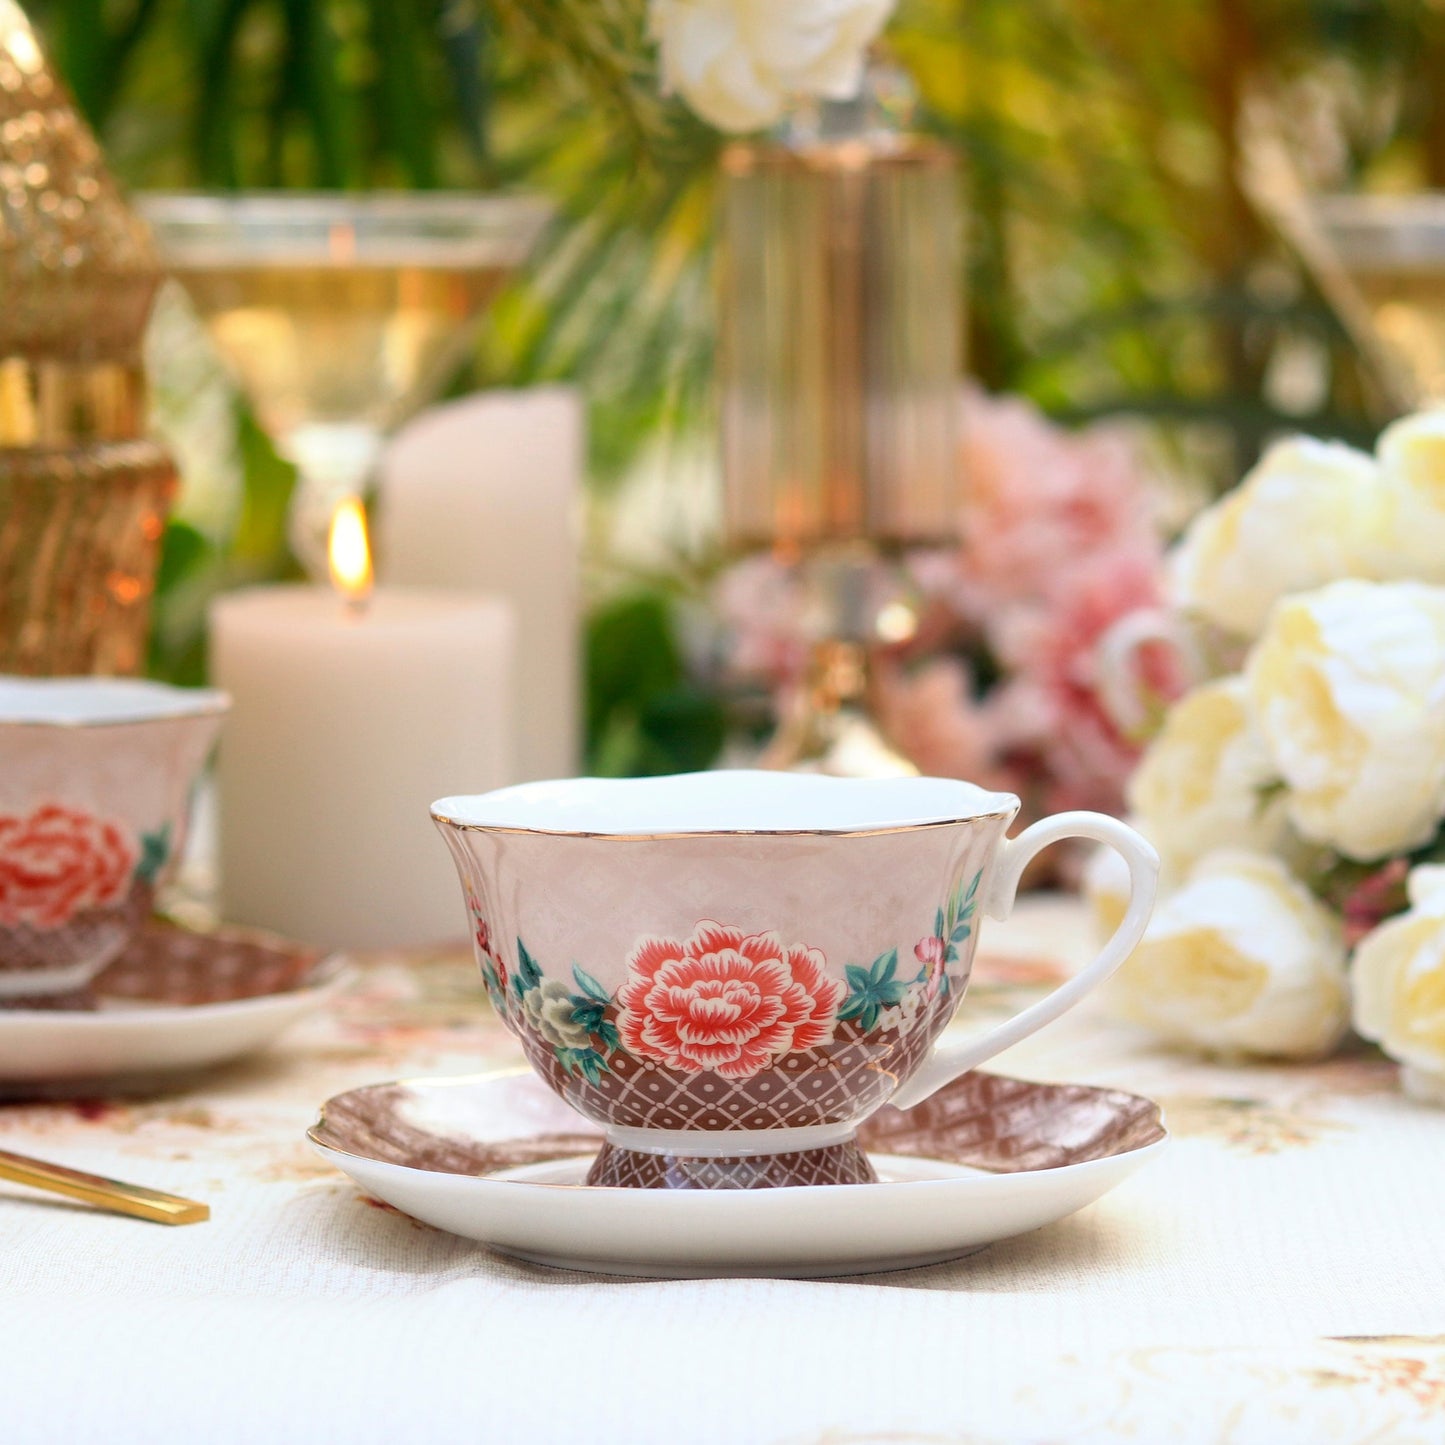 Sepia Blossom Cup and Saucer Set (Vintage Collection, 6 Cups and 6 Saucers)